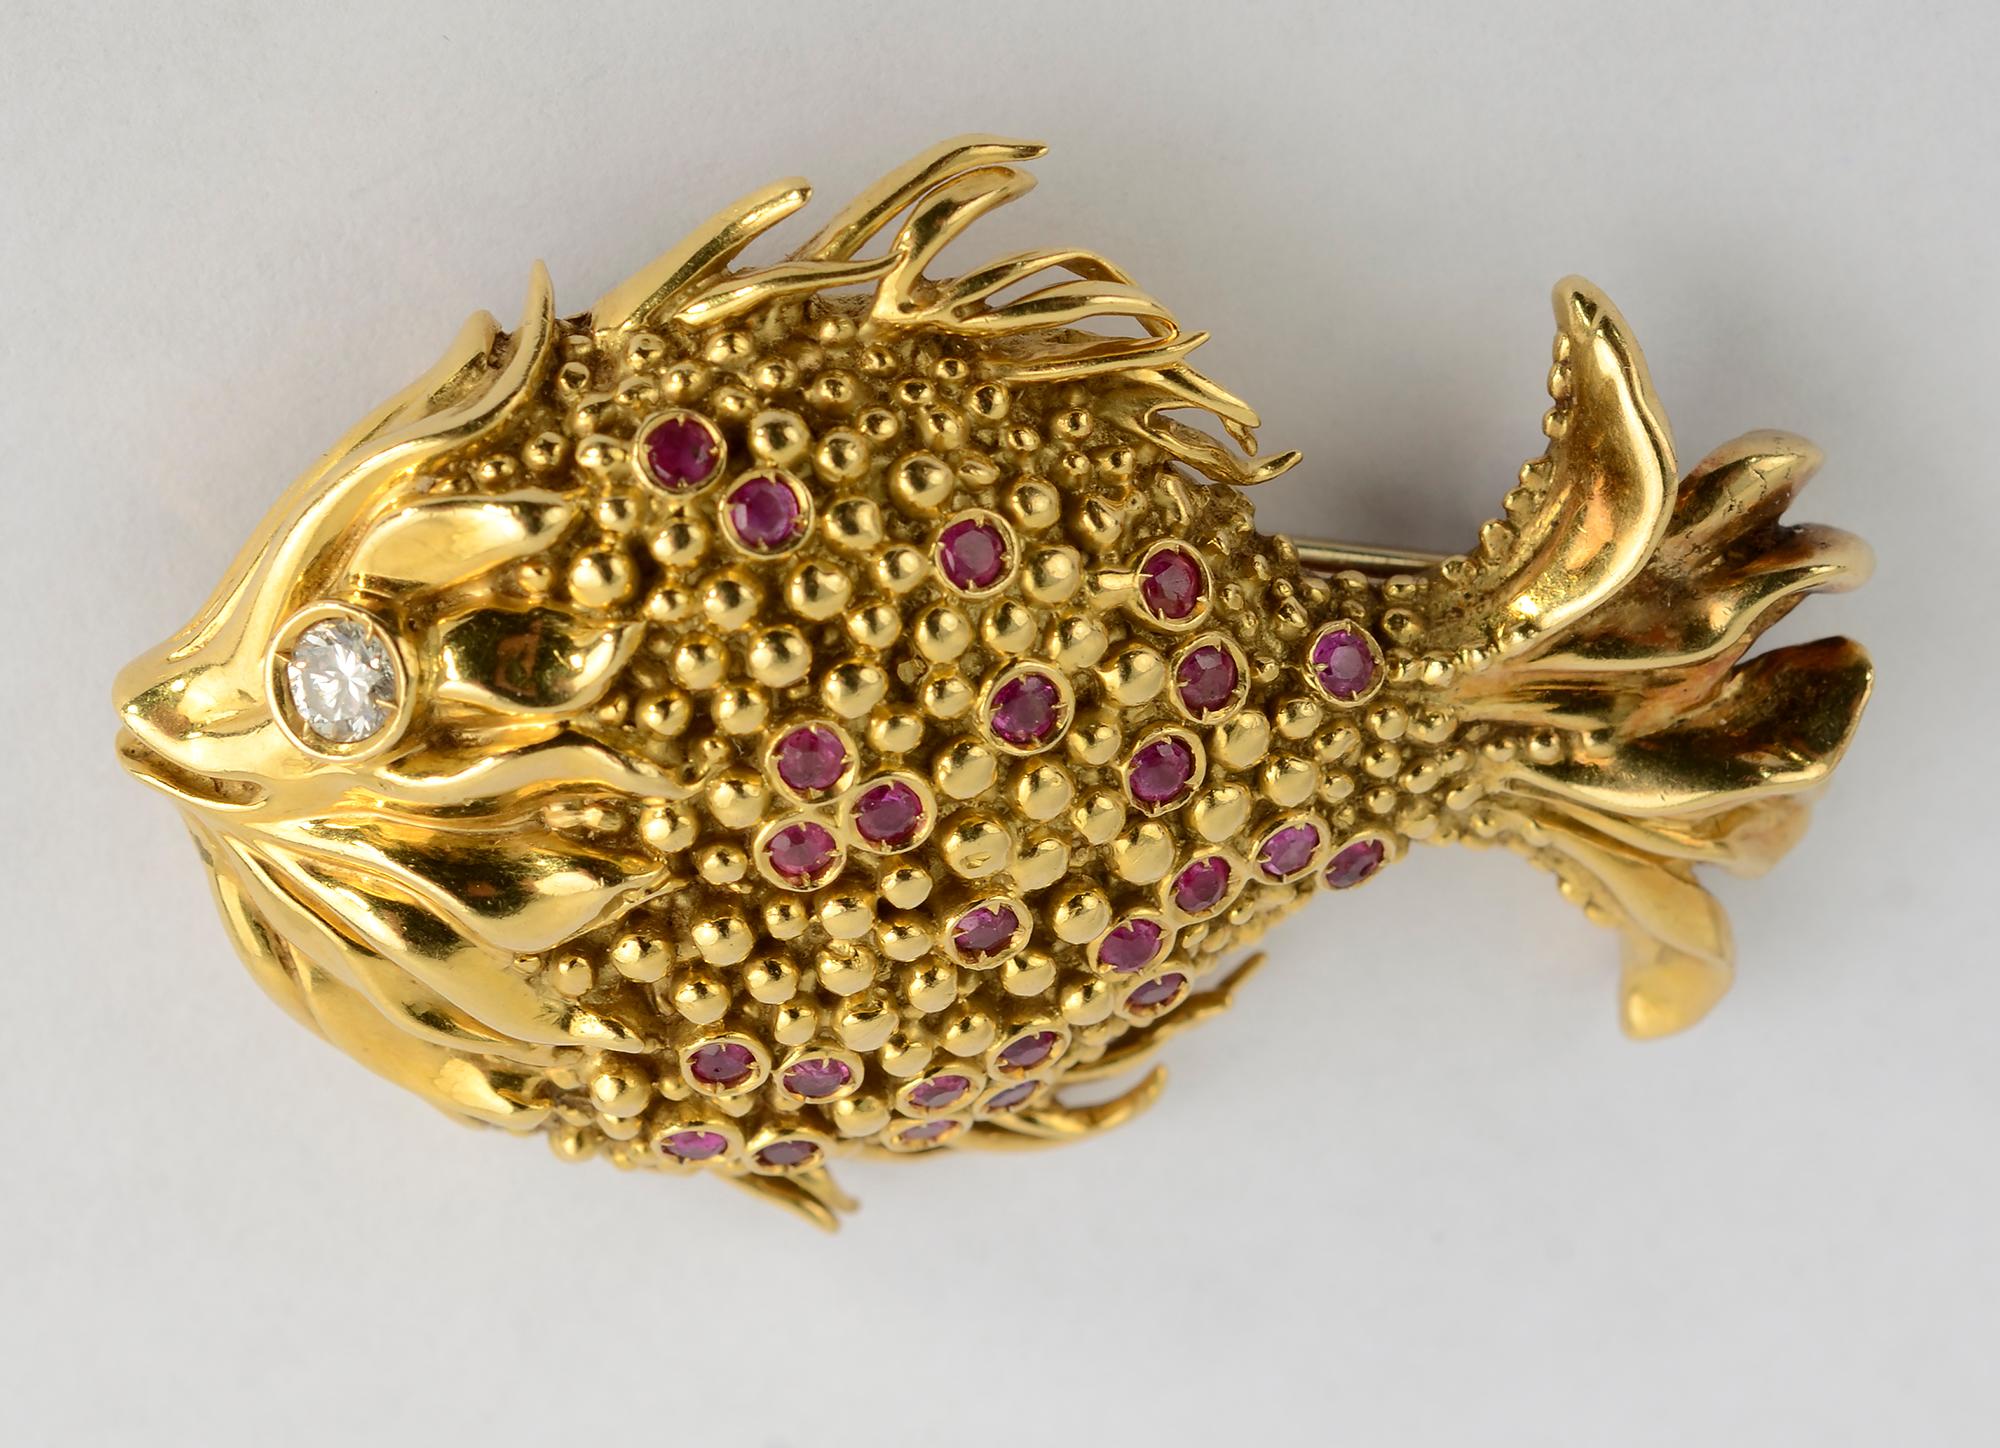 Wonderfully whimsical gold fish brooch by Tiffany with ruby highlights throughout the body and a .13 carat diamond eye. The fins and face have ruffled features while the body is made of very small gold beads giving a terrific texture. The fish